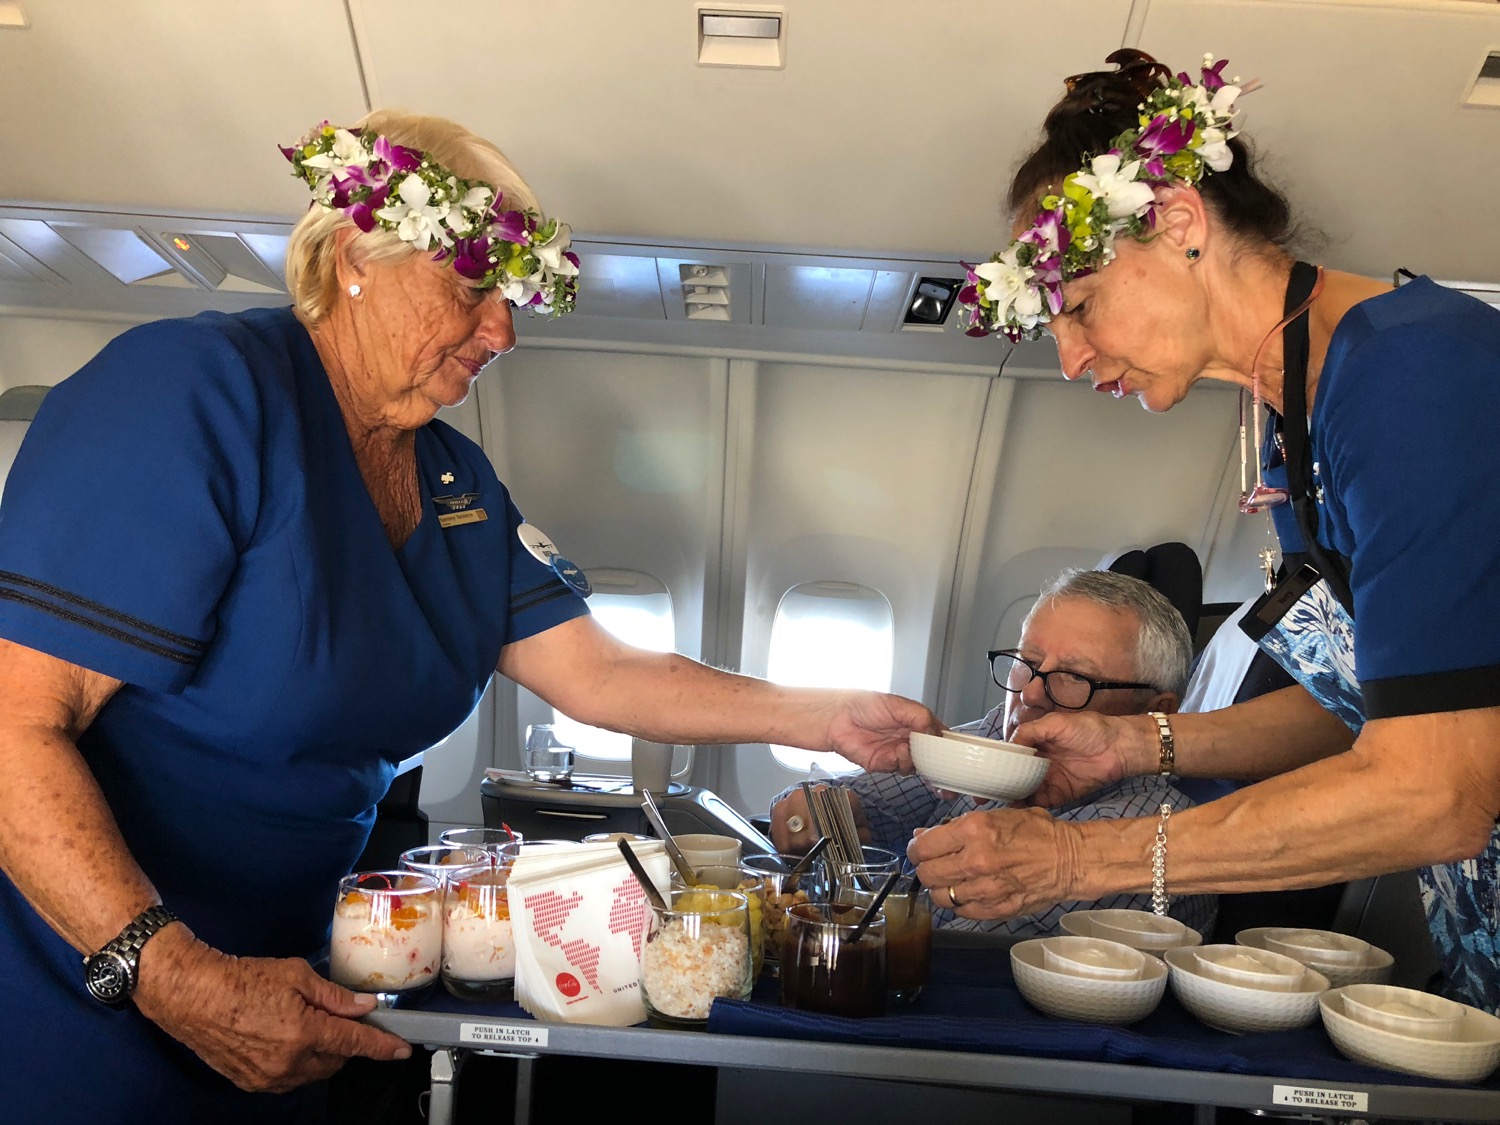 a group of people on an airplane serving food